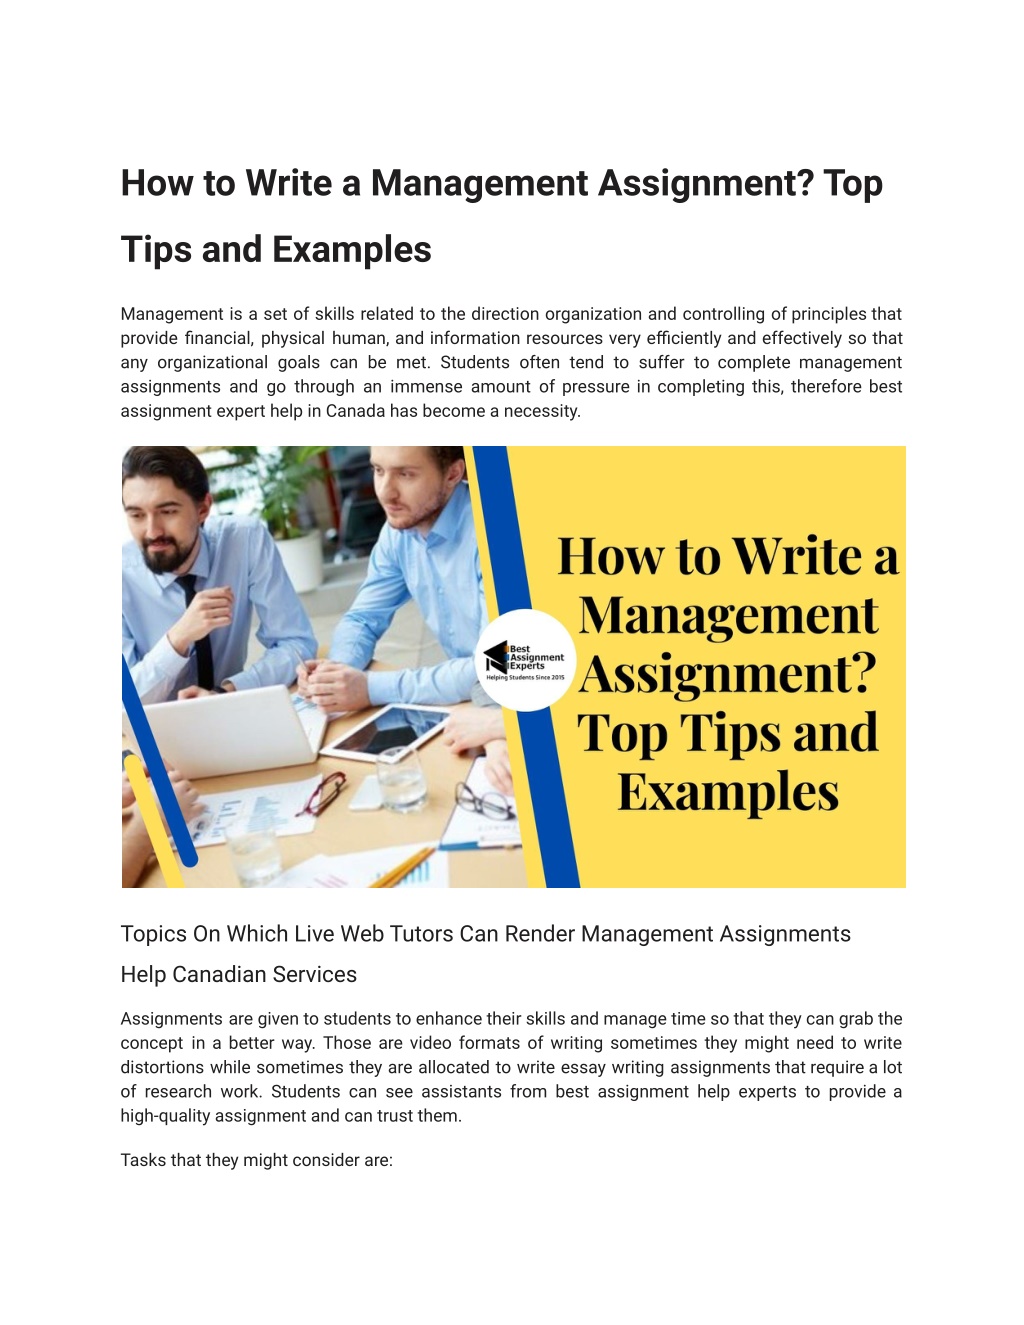 management assignment meaning